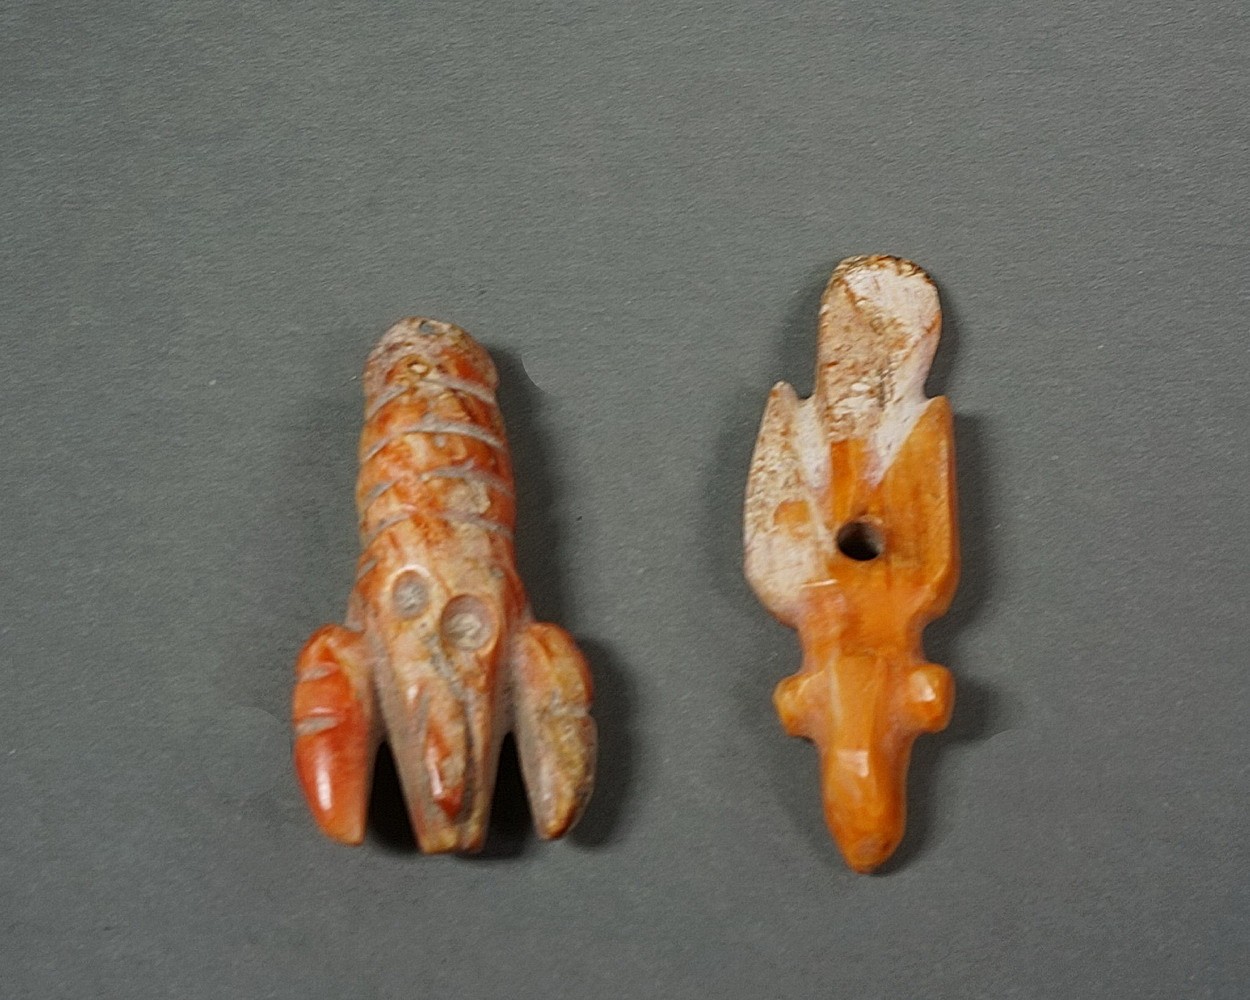 Peru, Chimu Carved Crayfish and Bird Pendants Carved from Spondylus Shells
The pendant on the left depicts a crayfish, while the one on the right represents a marine bird.  Crayfish are found in the fresh water rivers along the Peruvian coast.  Both pendants have suspension holes for attachment to a bracelet or necklace.  Best seen from above, the bird has protruding eyes and a long tail.  Both items are the types of Spondylus artifacts that are found on Peruvian North Coast Capa Pacha (child sacrifice ceremony). This is in discussed in PYRAMIDS OF TUCUME- The quest frof the Peru's Forgotten City by Thor Hyerdahl and Daniel Sandweisspg,106-112
Media: Shell
Dimensions: Crayfish  Length: 1 3/8"Bird Length:  1 1/2"
$1,250
N7002